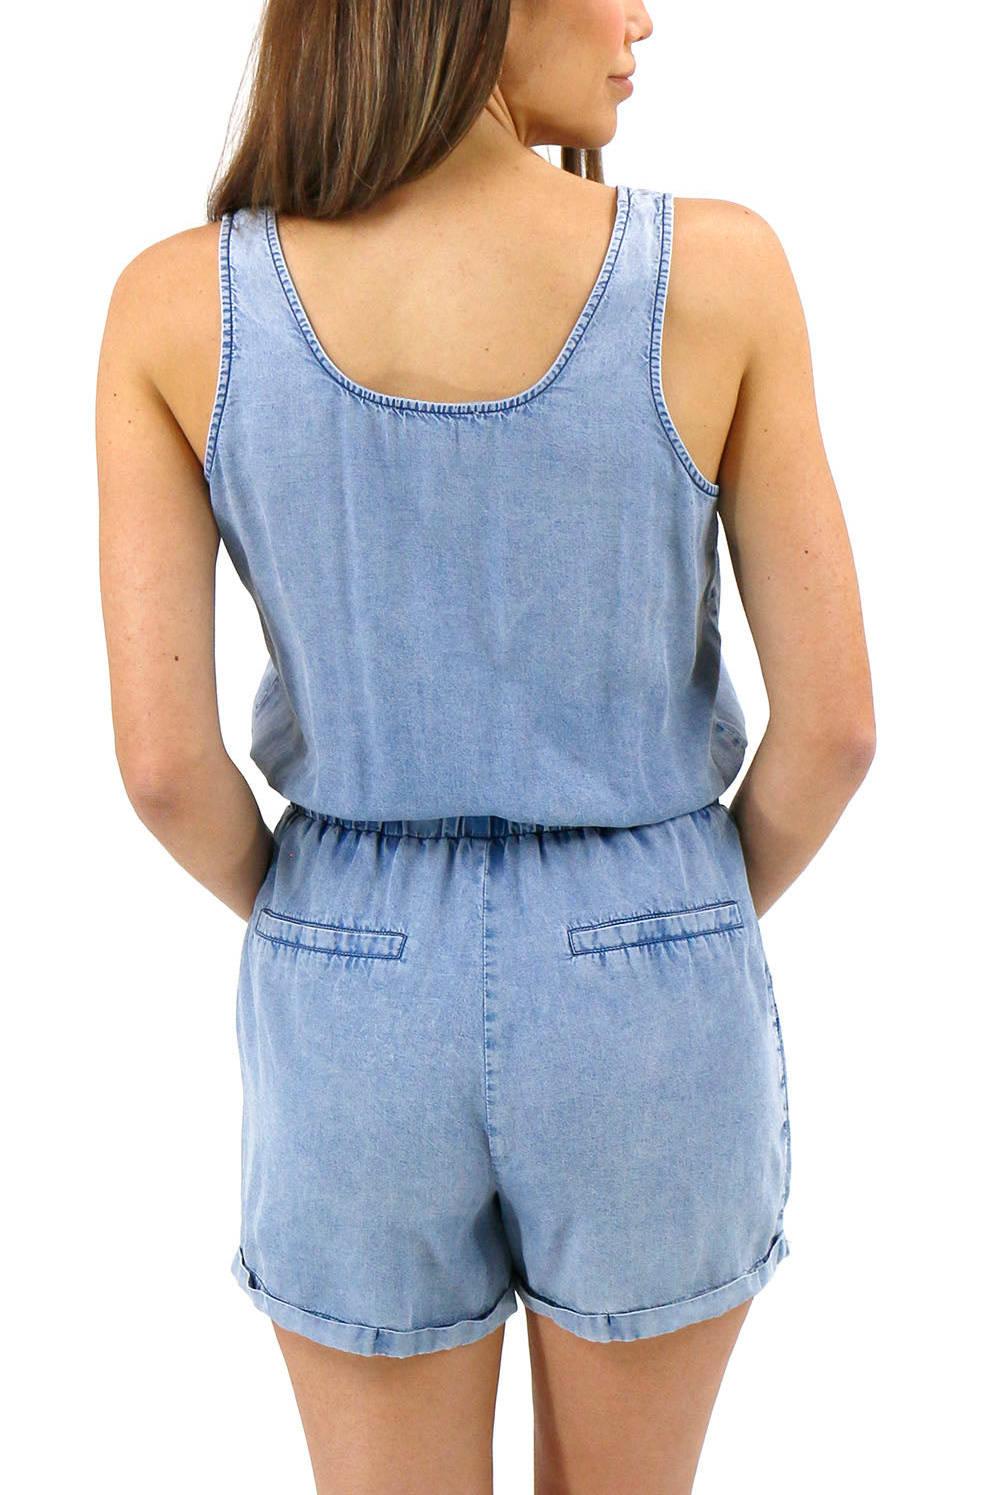 Tencel Chambray Romper - Strawberry Moon Boutique